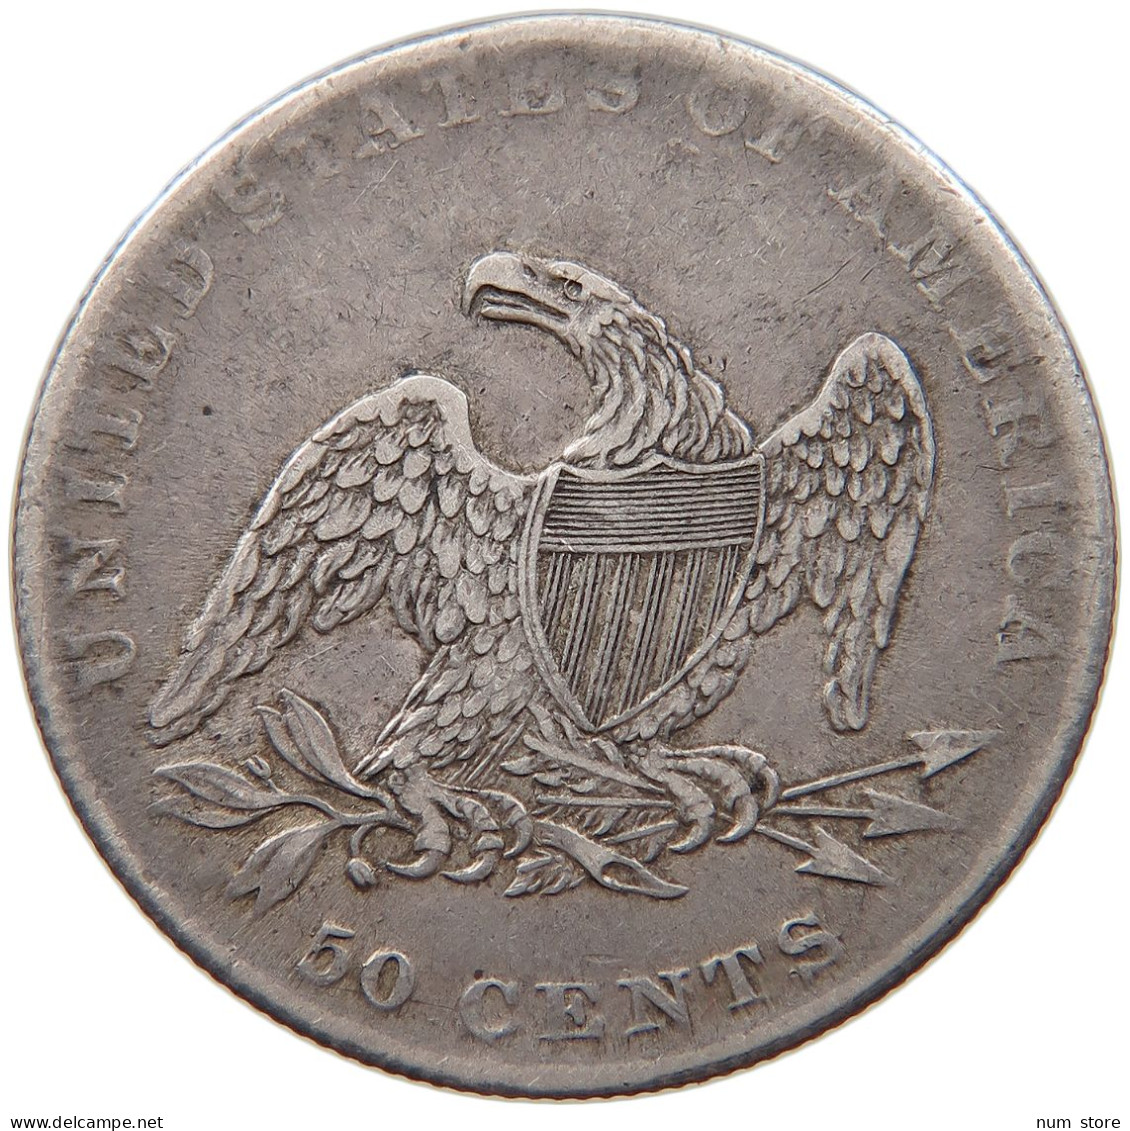 UNITED STATES OF AMERICA HALF DOLLAR 1837 CAPPED BUST #t141 0427 - 1794-1839: Early Halves (Prémices)